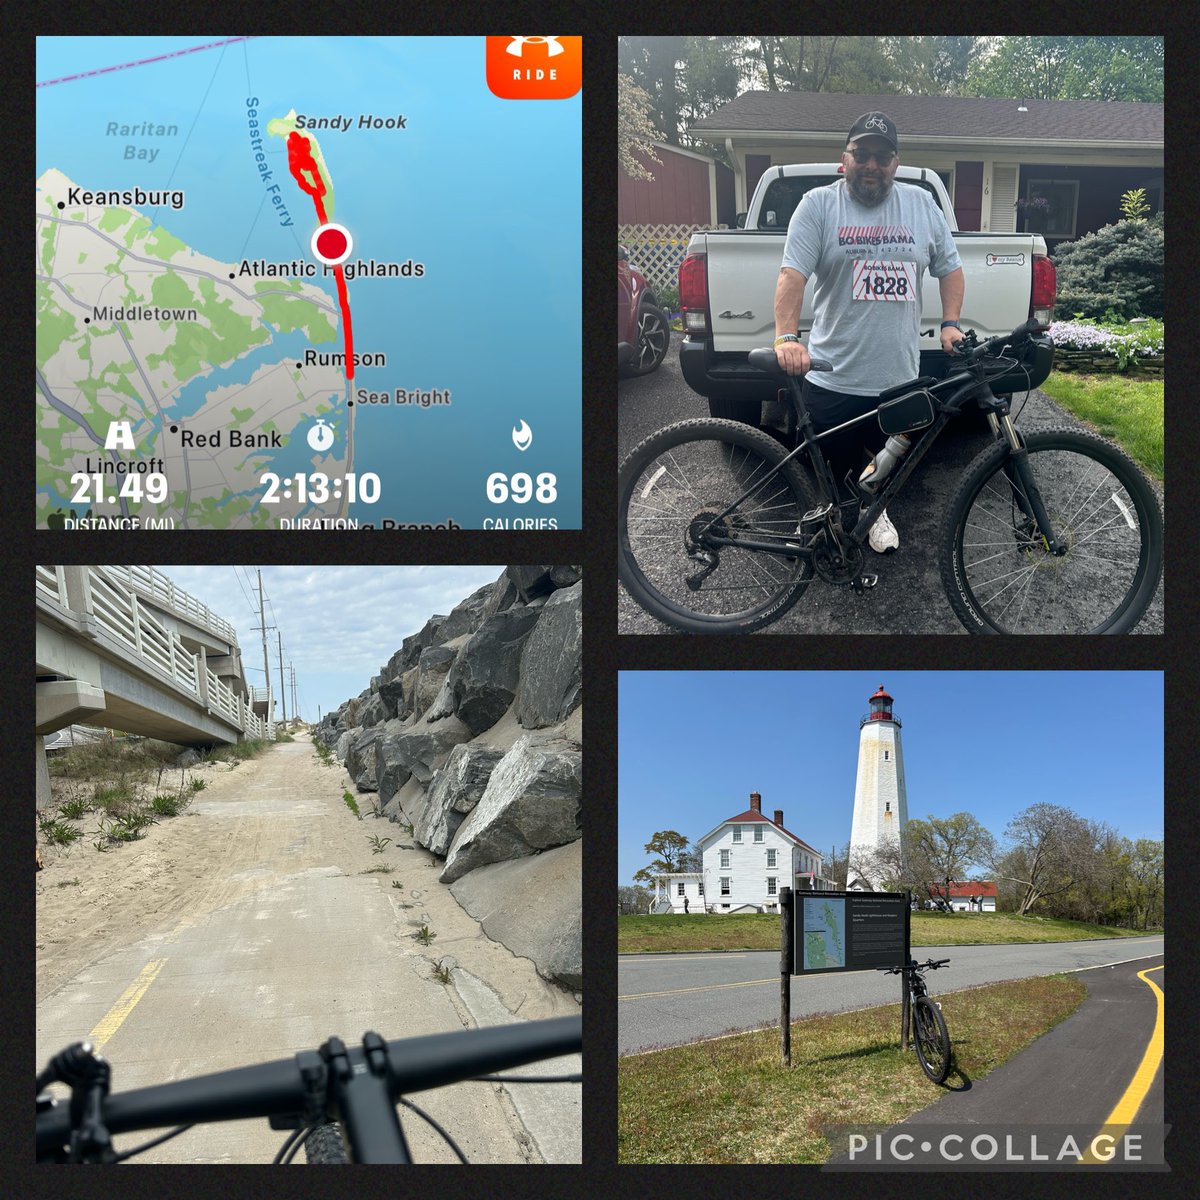 4th year of doing Bo Bikes Bama remotely.  One day I’ll make it down to Bama but for now the Jersey shore had to suffice. #bobikesbama #whyweride #justkeeppedaling